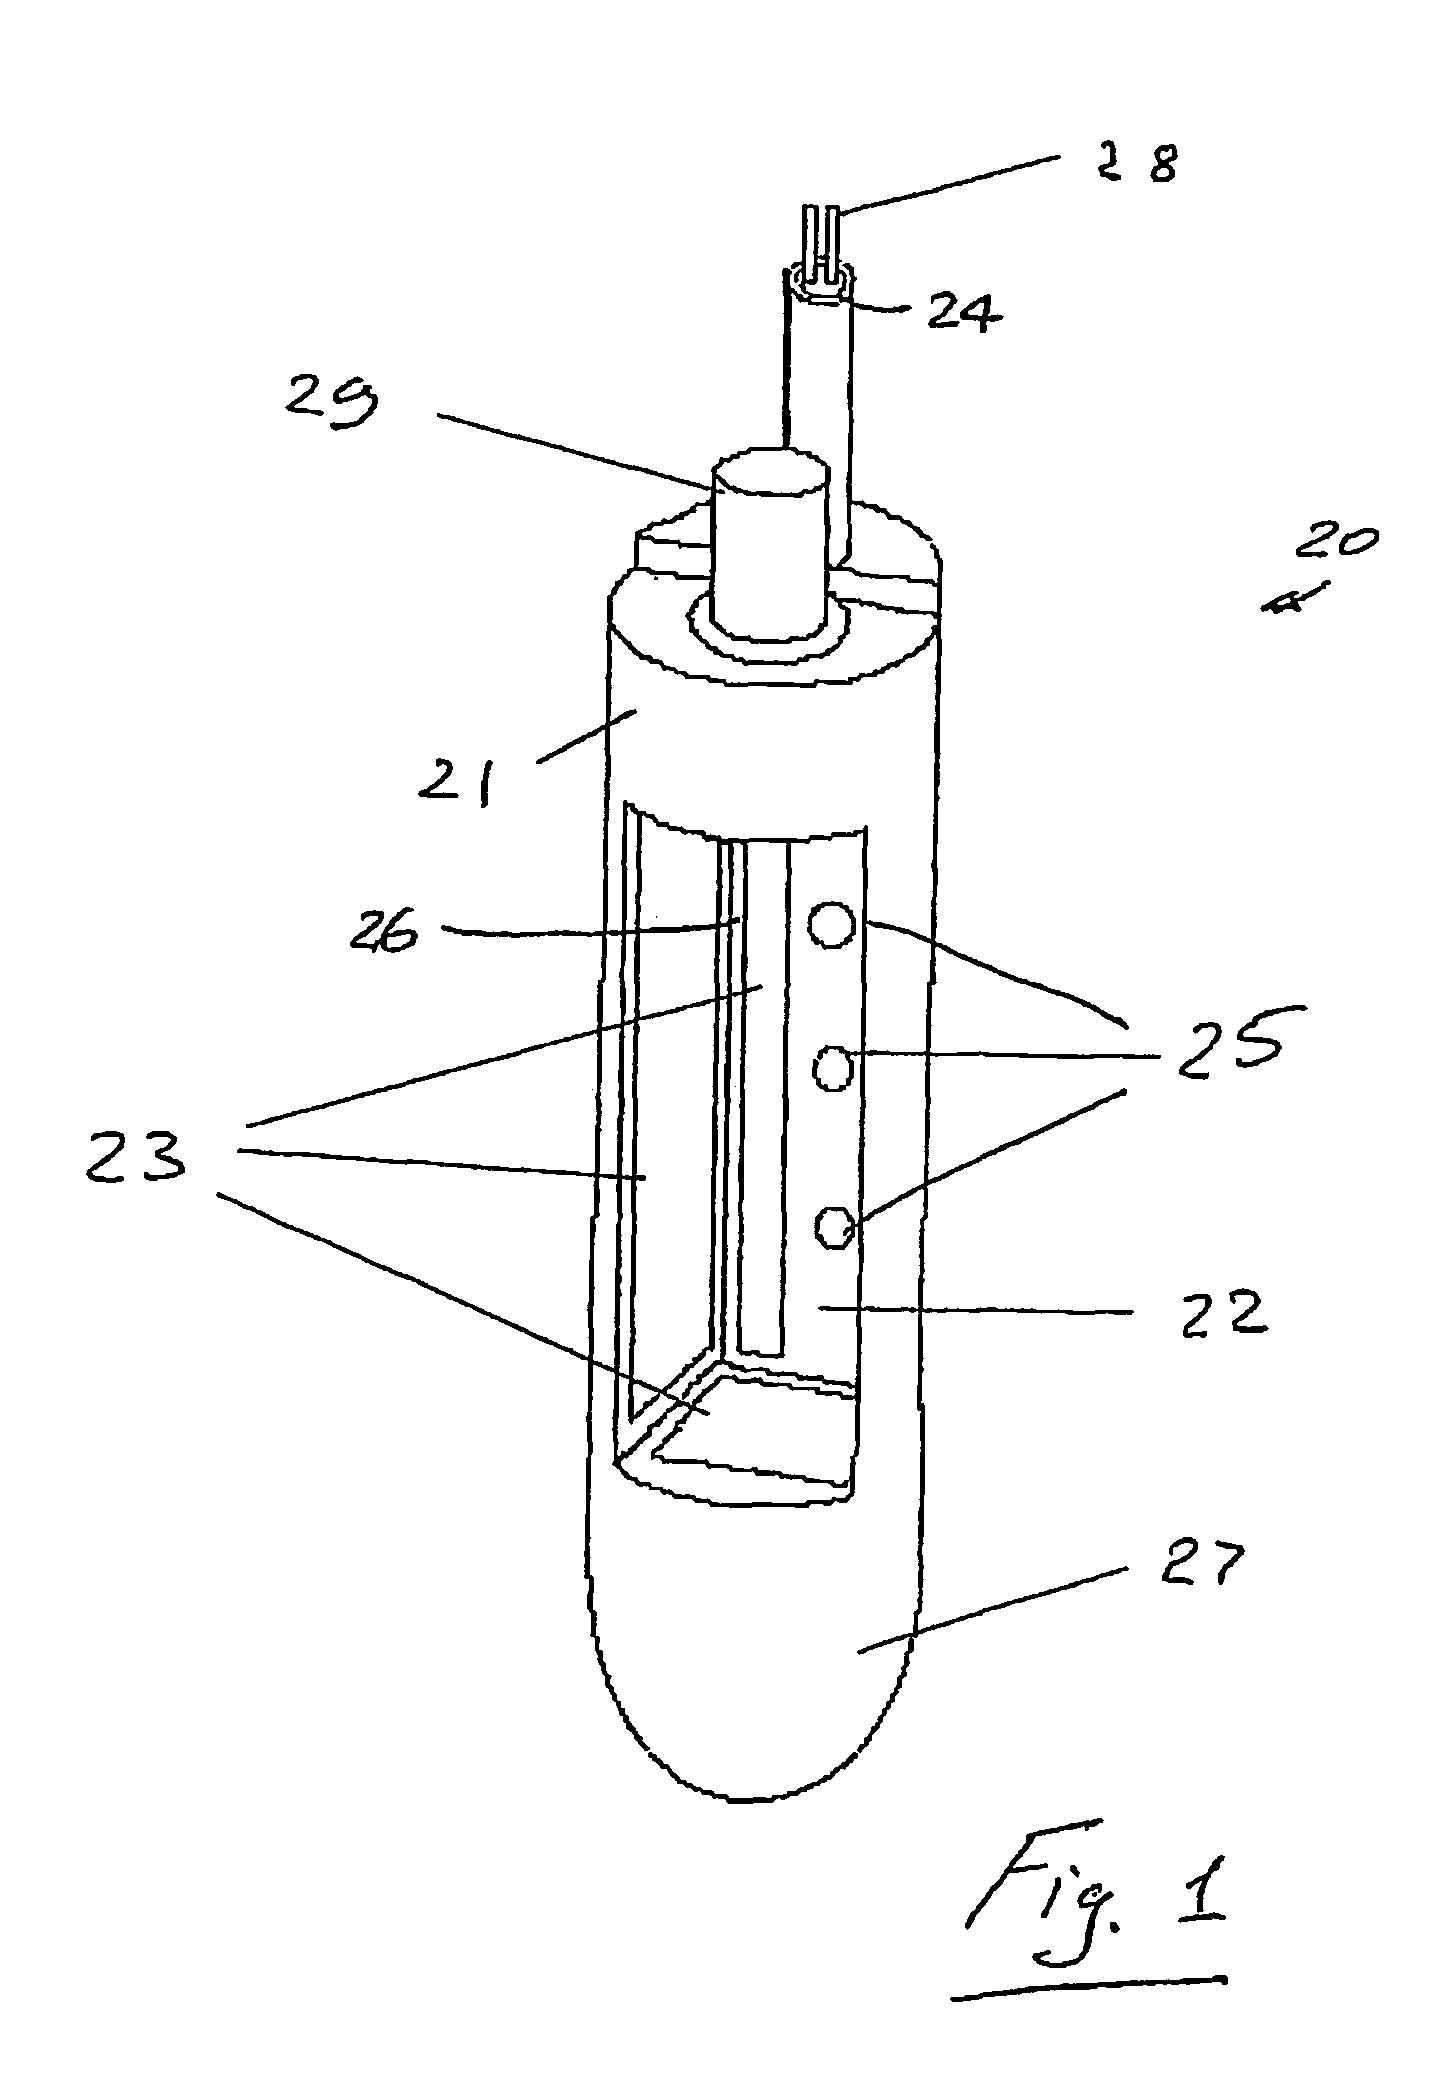 Apparatus for use in the prophylaxis or treatment of tissue